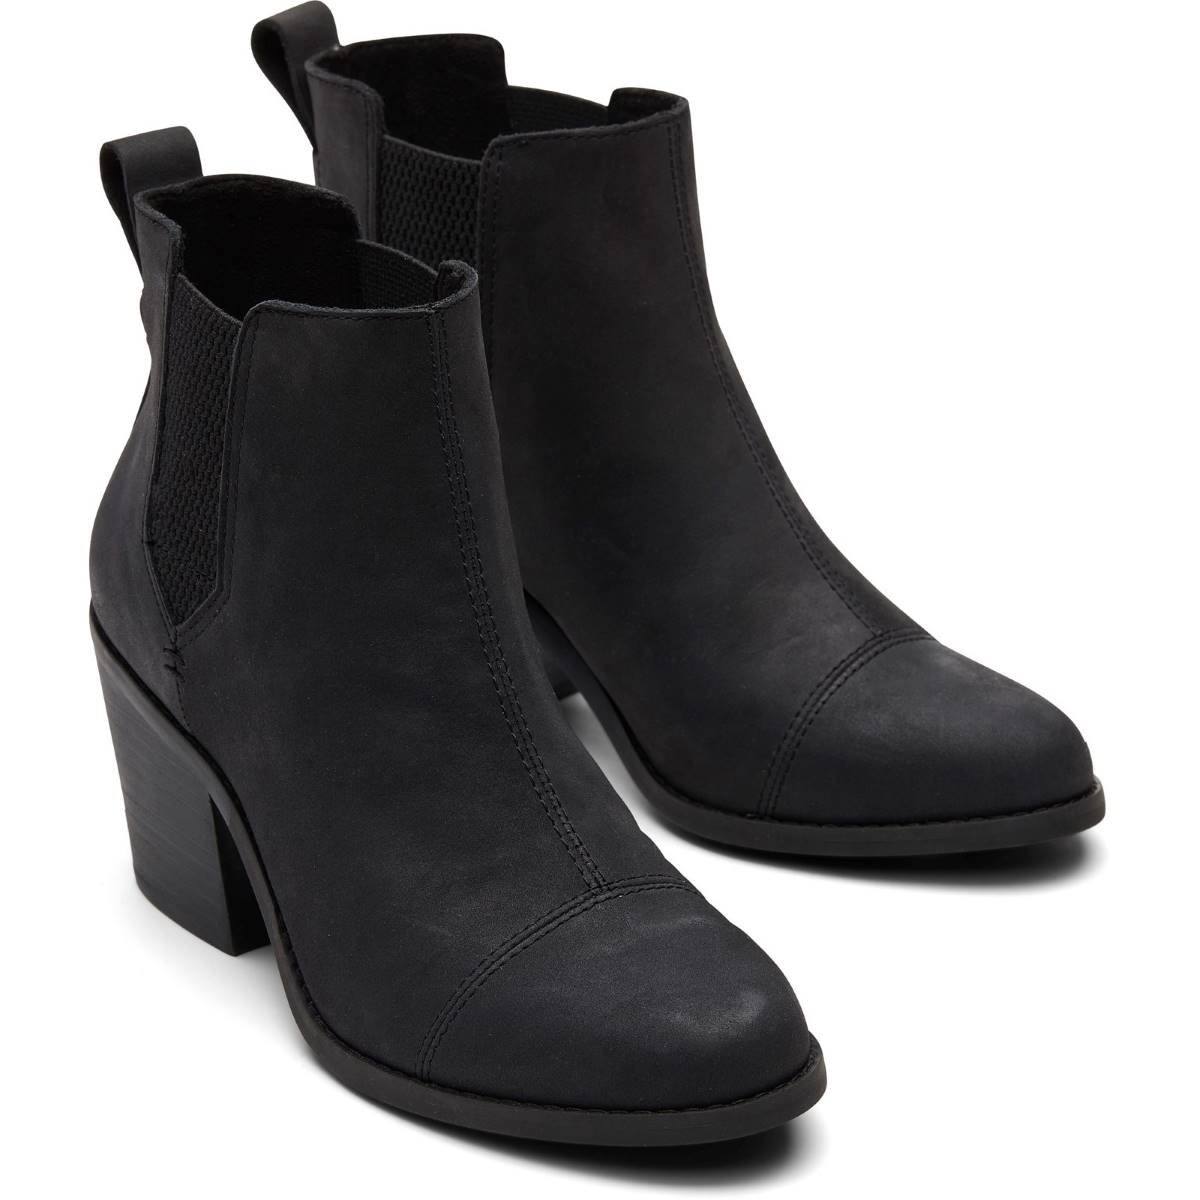 Toms Everly Black Womens ankle boots 10016837 in a Plain Leather in Size 8